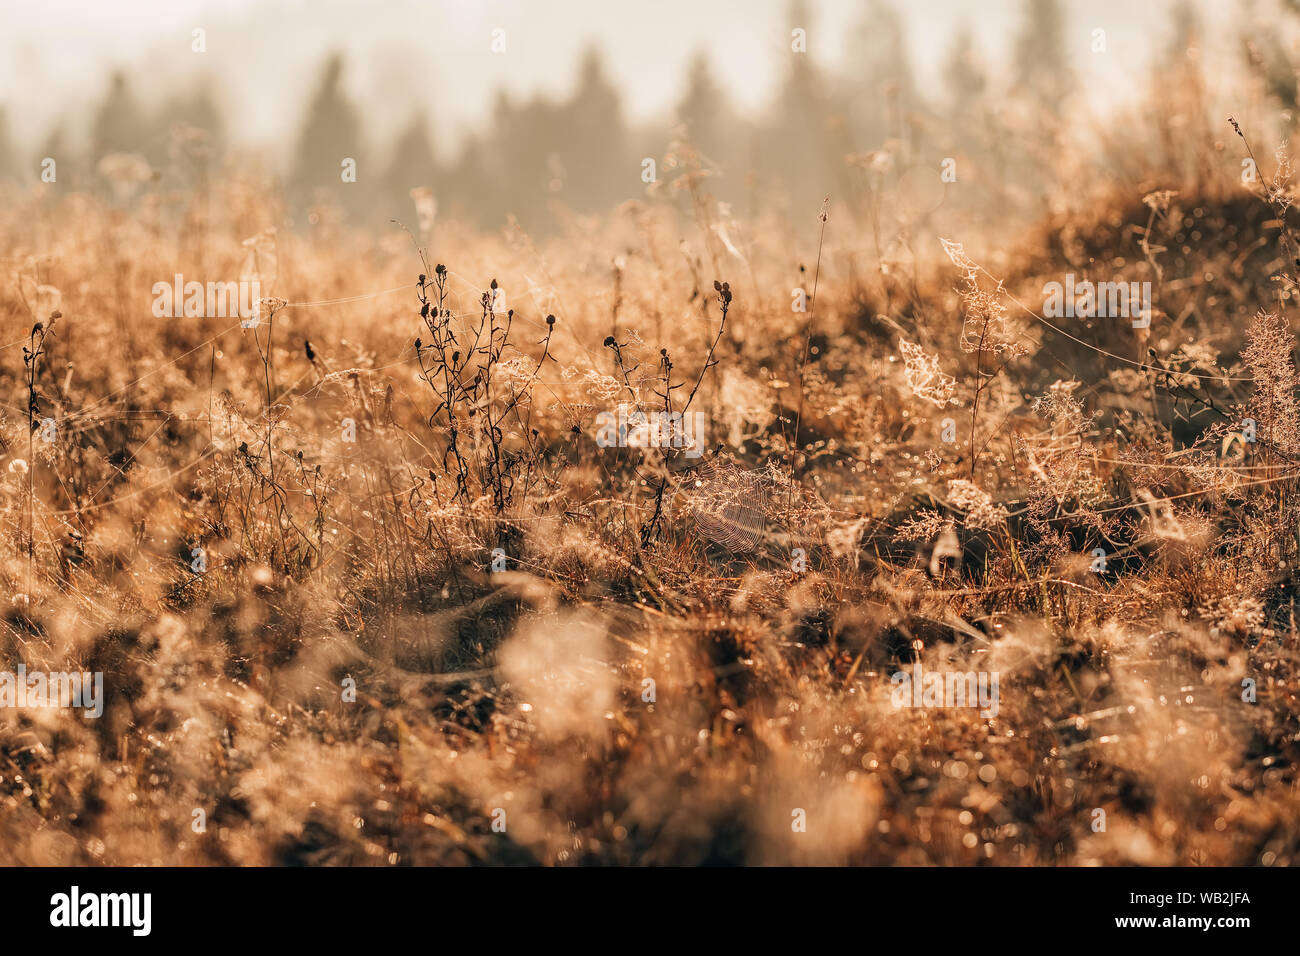 Spider web in the thickets of autumn grass at sunrise Stock Photo